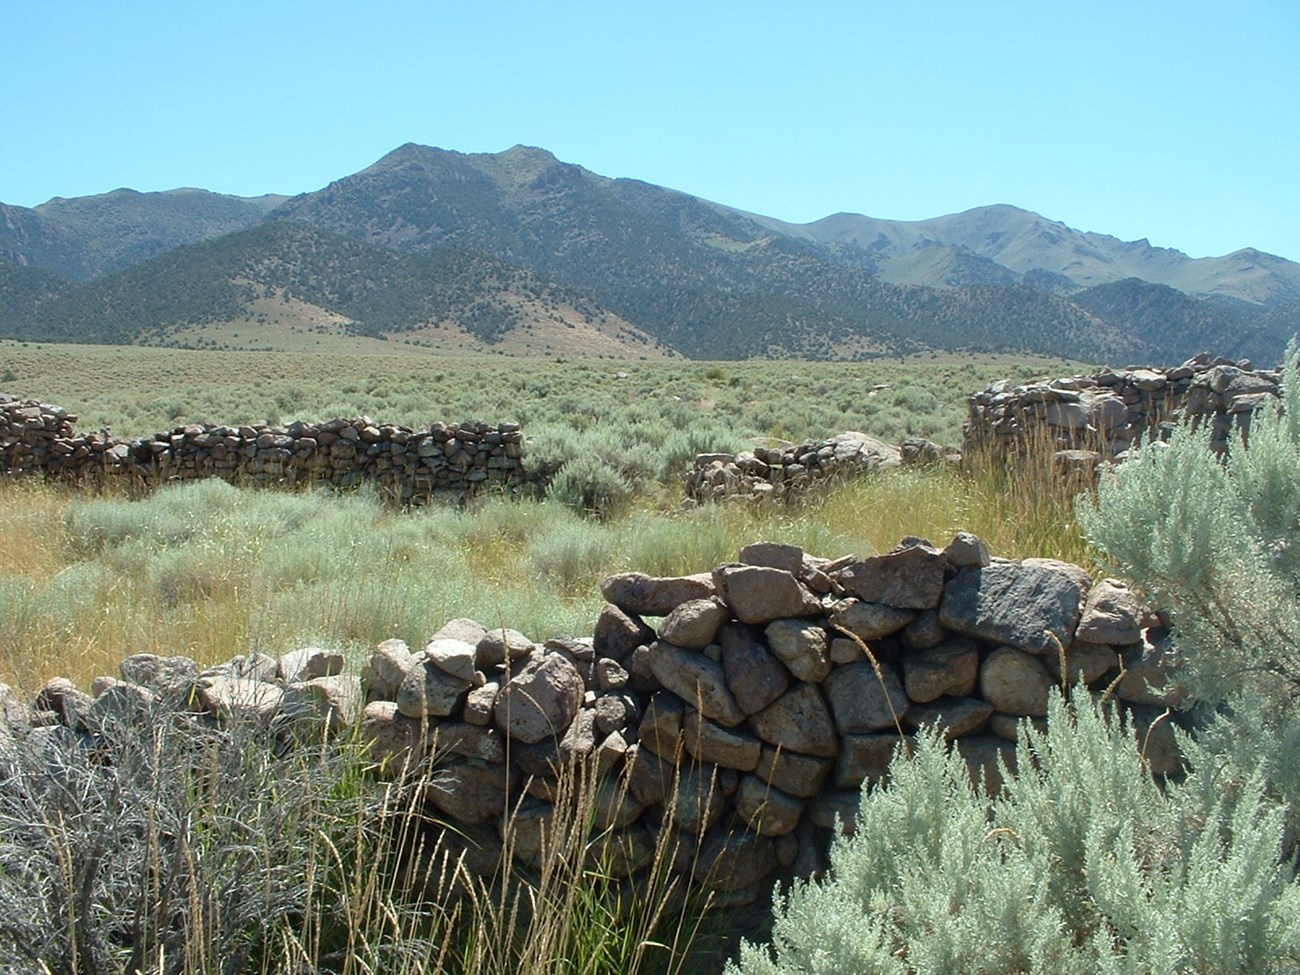 A ruins of a stone wall with distant desert mountains.